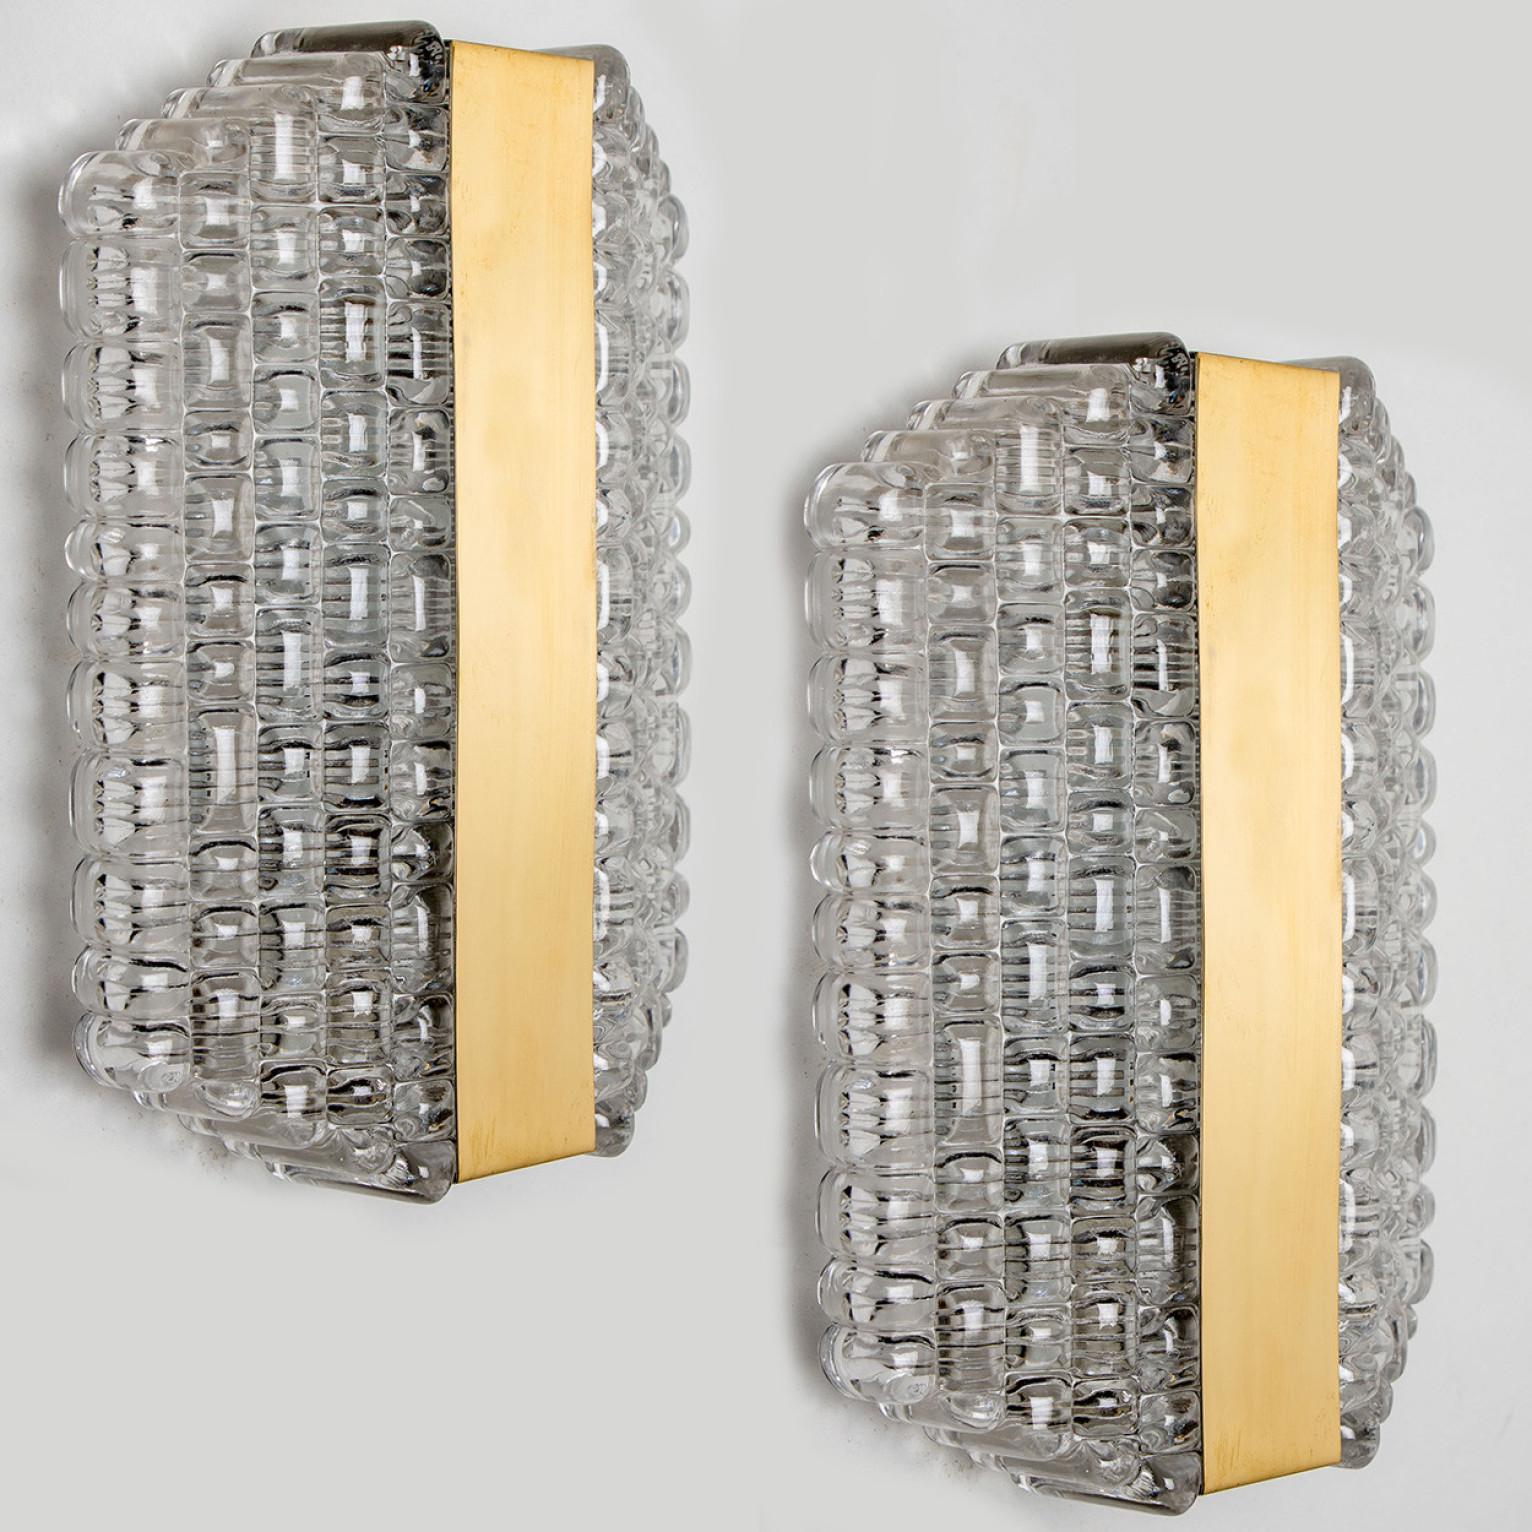 Pair of handmade high quality light fixture made by Kaiser Leuchten, Austria. Manufactured in midcentury, circa 1970 (at the end of 1960s and beginning of 1970s).
This wall light features two halves made of handmade textured glass, divided by a